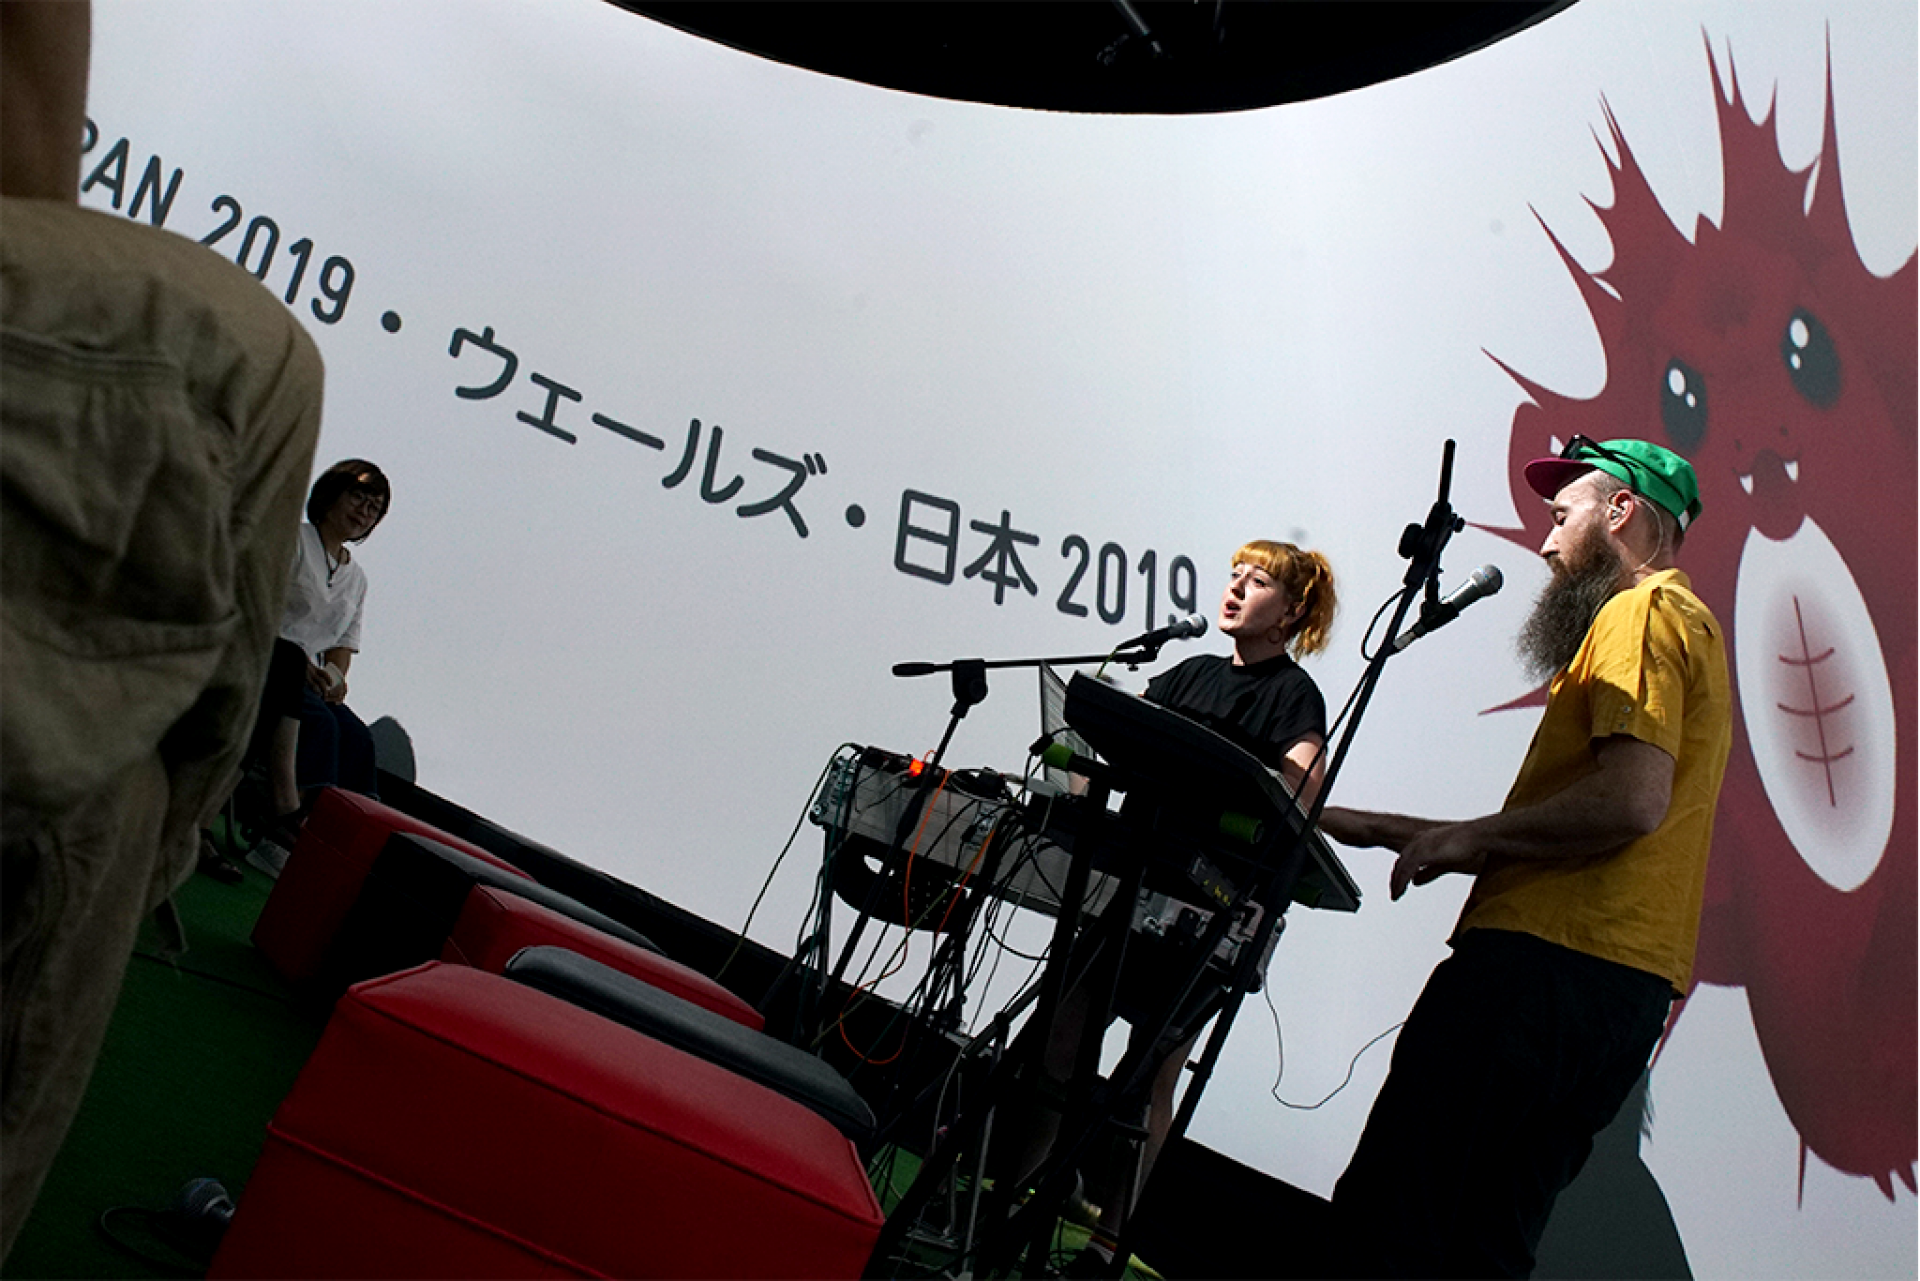 A male and female musical performance. Singing and playing keyboards in front of a large screen containing a cartoon character and Japanese writing